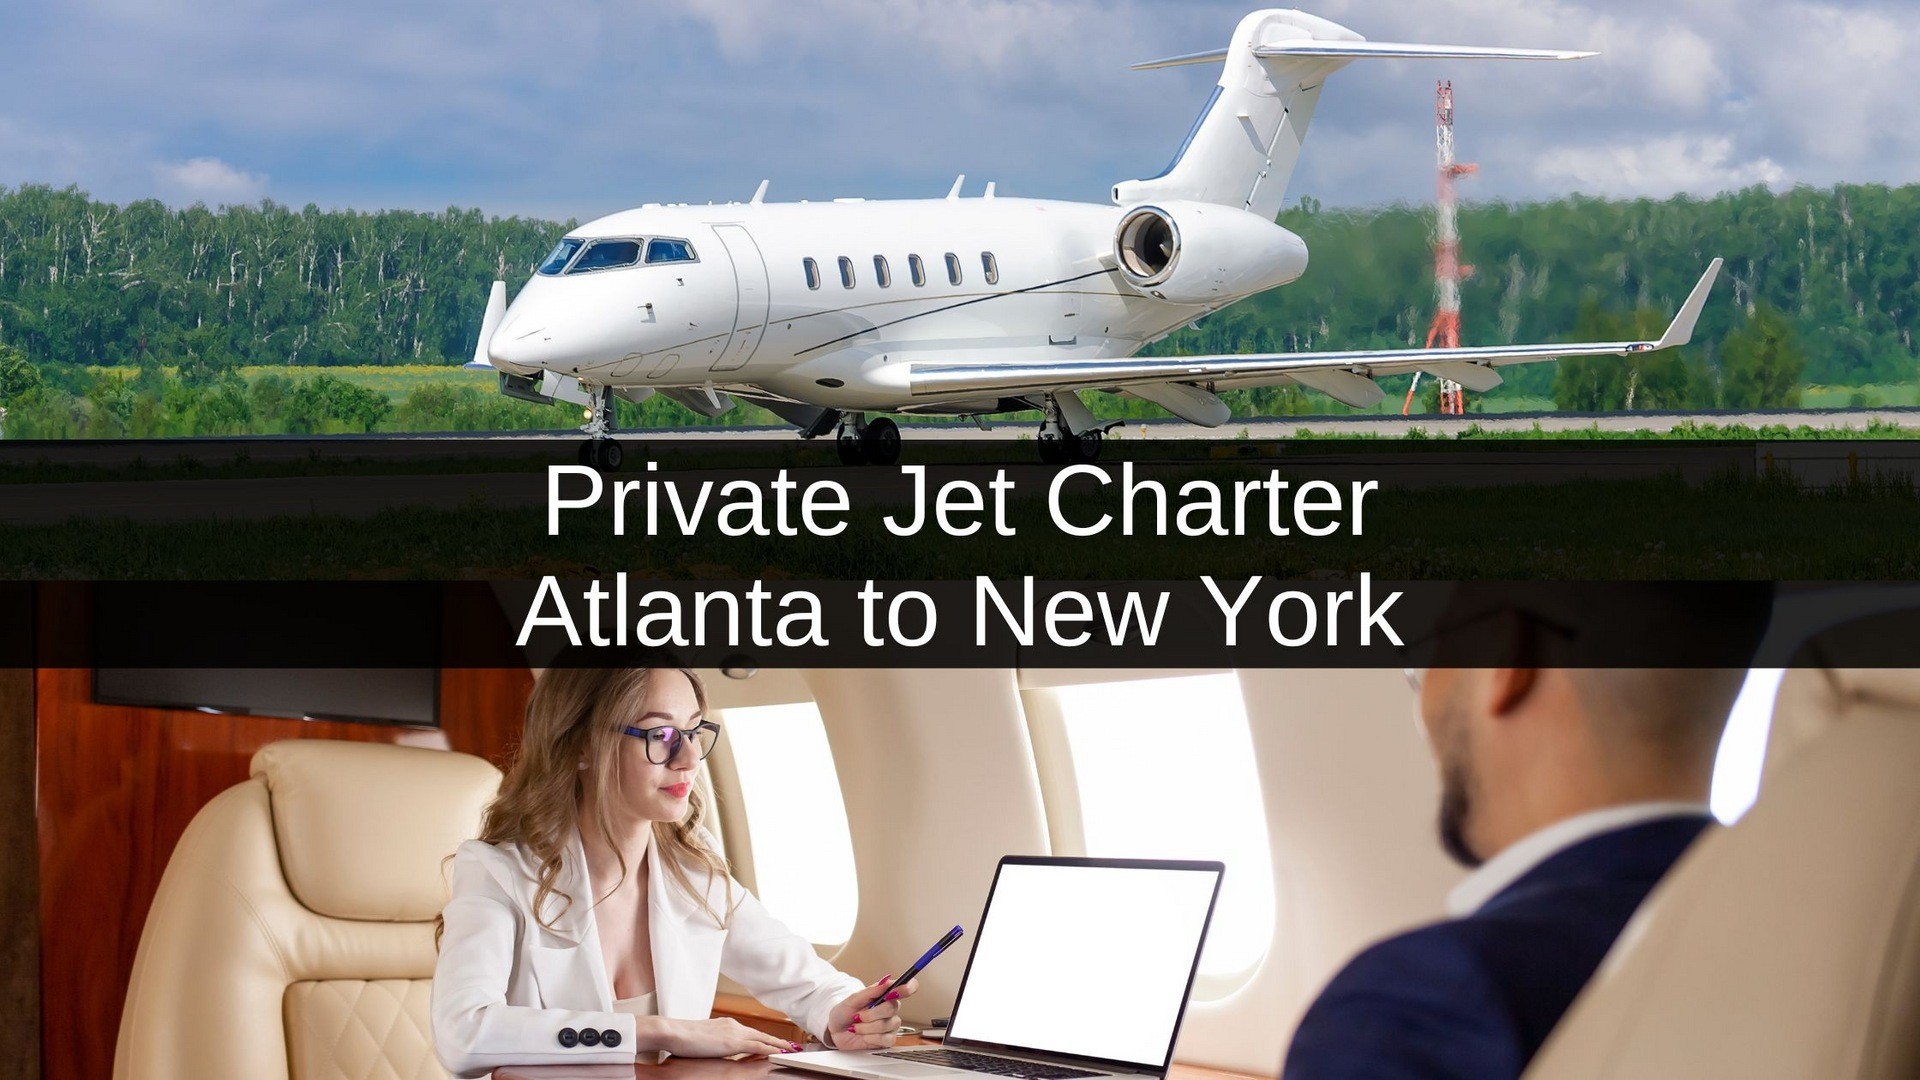 Private Jet Charter from Atlanta to New York